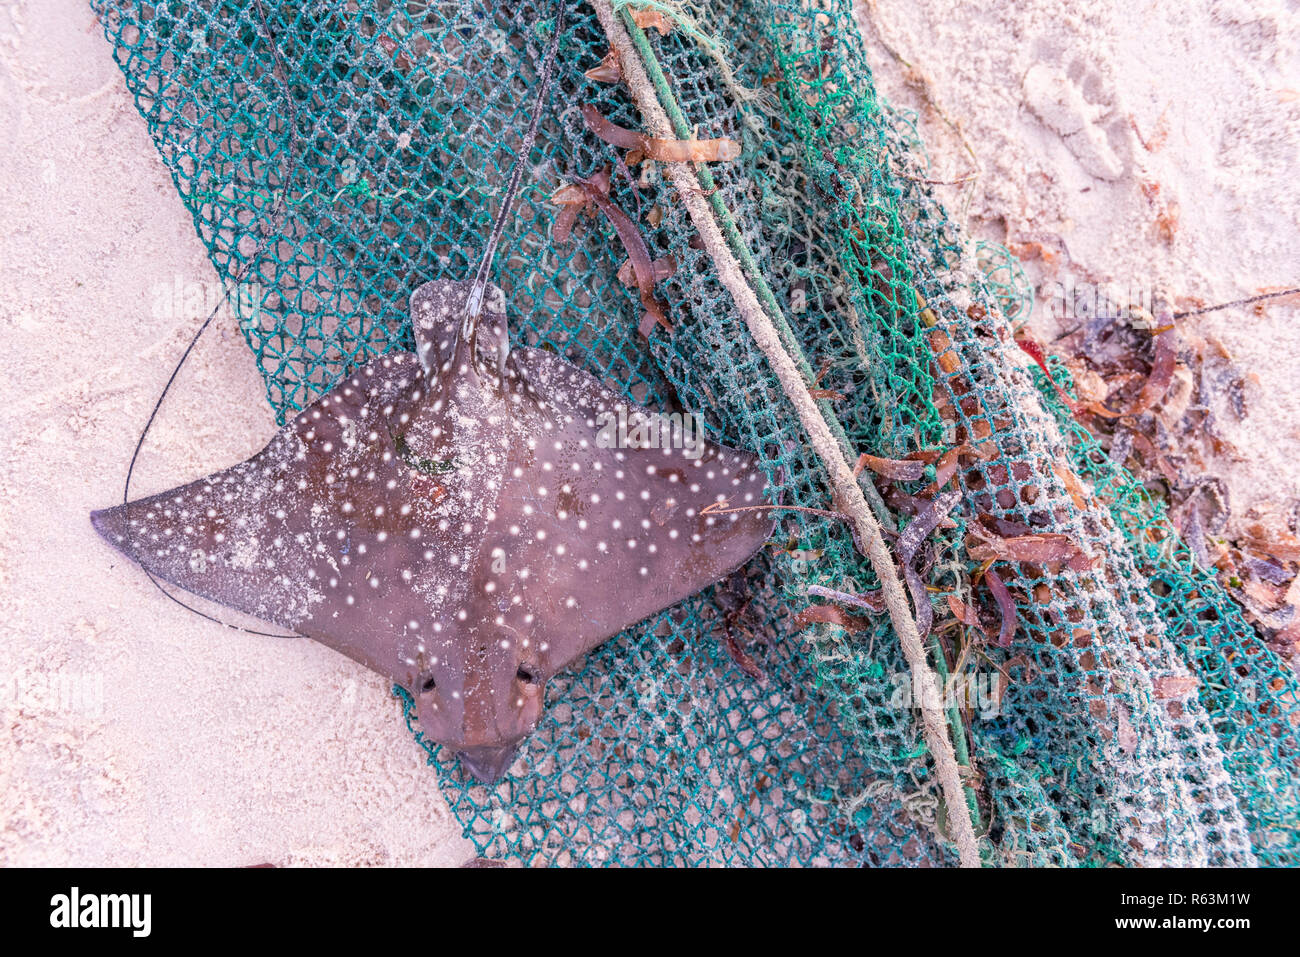 A spotted eagle ray Aetobatus narinari caught in a net in Mozambique. Stock Photo